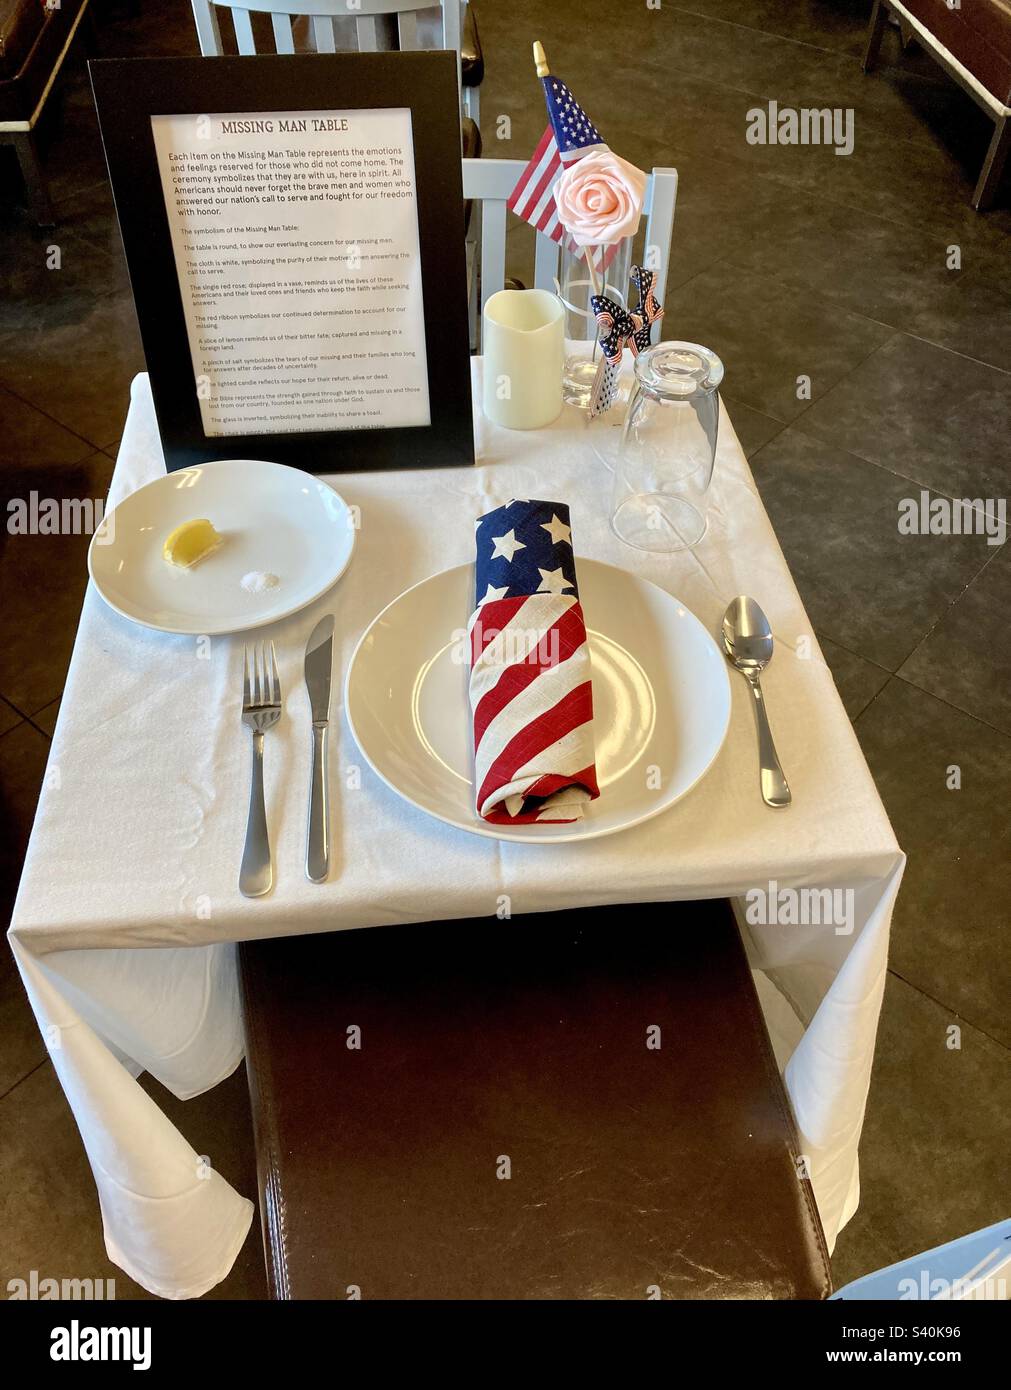 Picture of the “missing man table” representing armed forces Mia soldiers Stock Photo